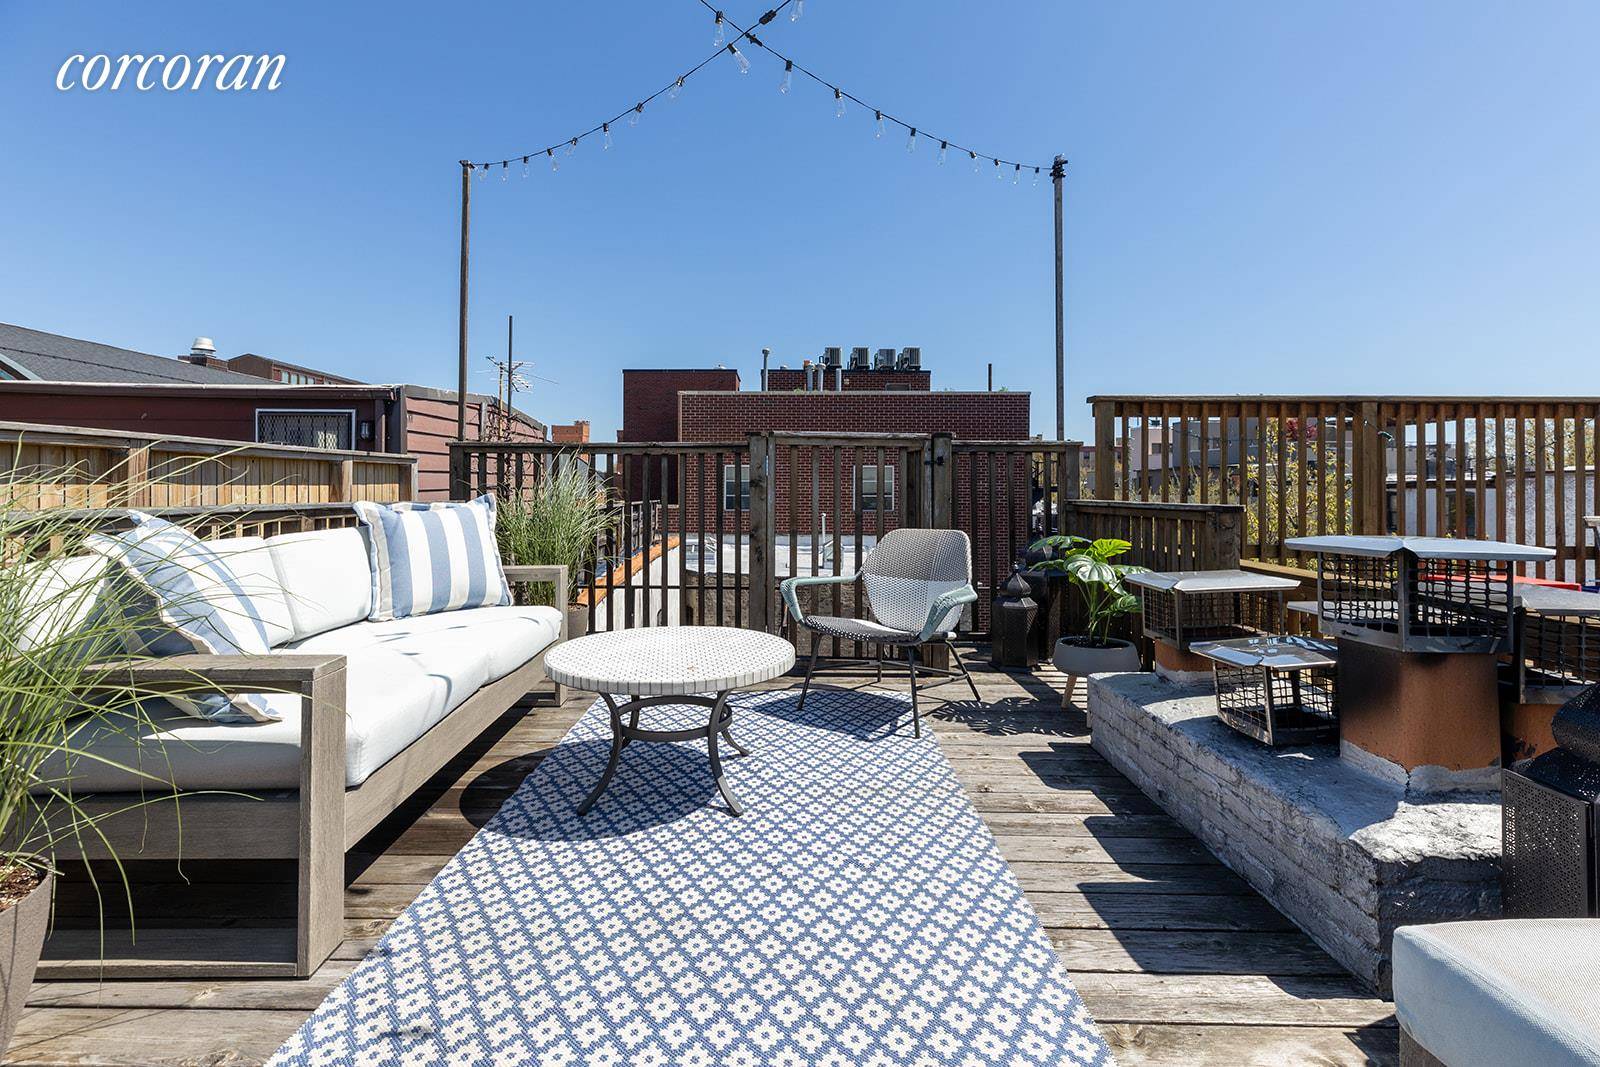 Welcome home to your renovated one bedroom one and half bath duplex apartment with private roof deck, washer dryer, a wood burning fireplace and separate storage space.